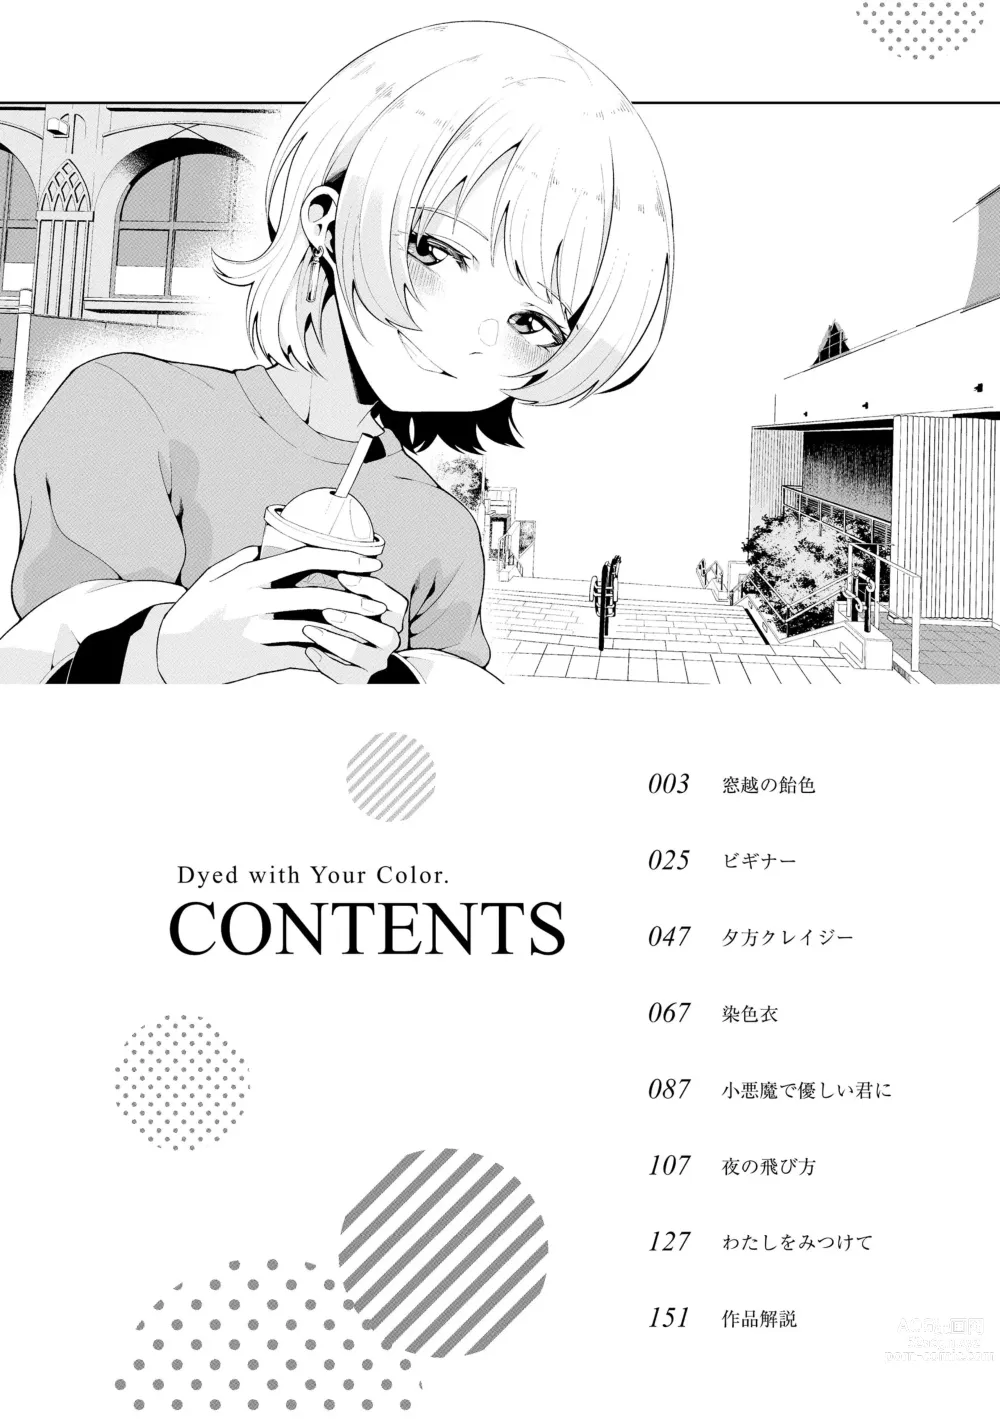 Page 4 of manga Watashi de Sometai - Dyed with Your Color.